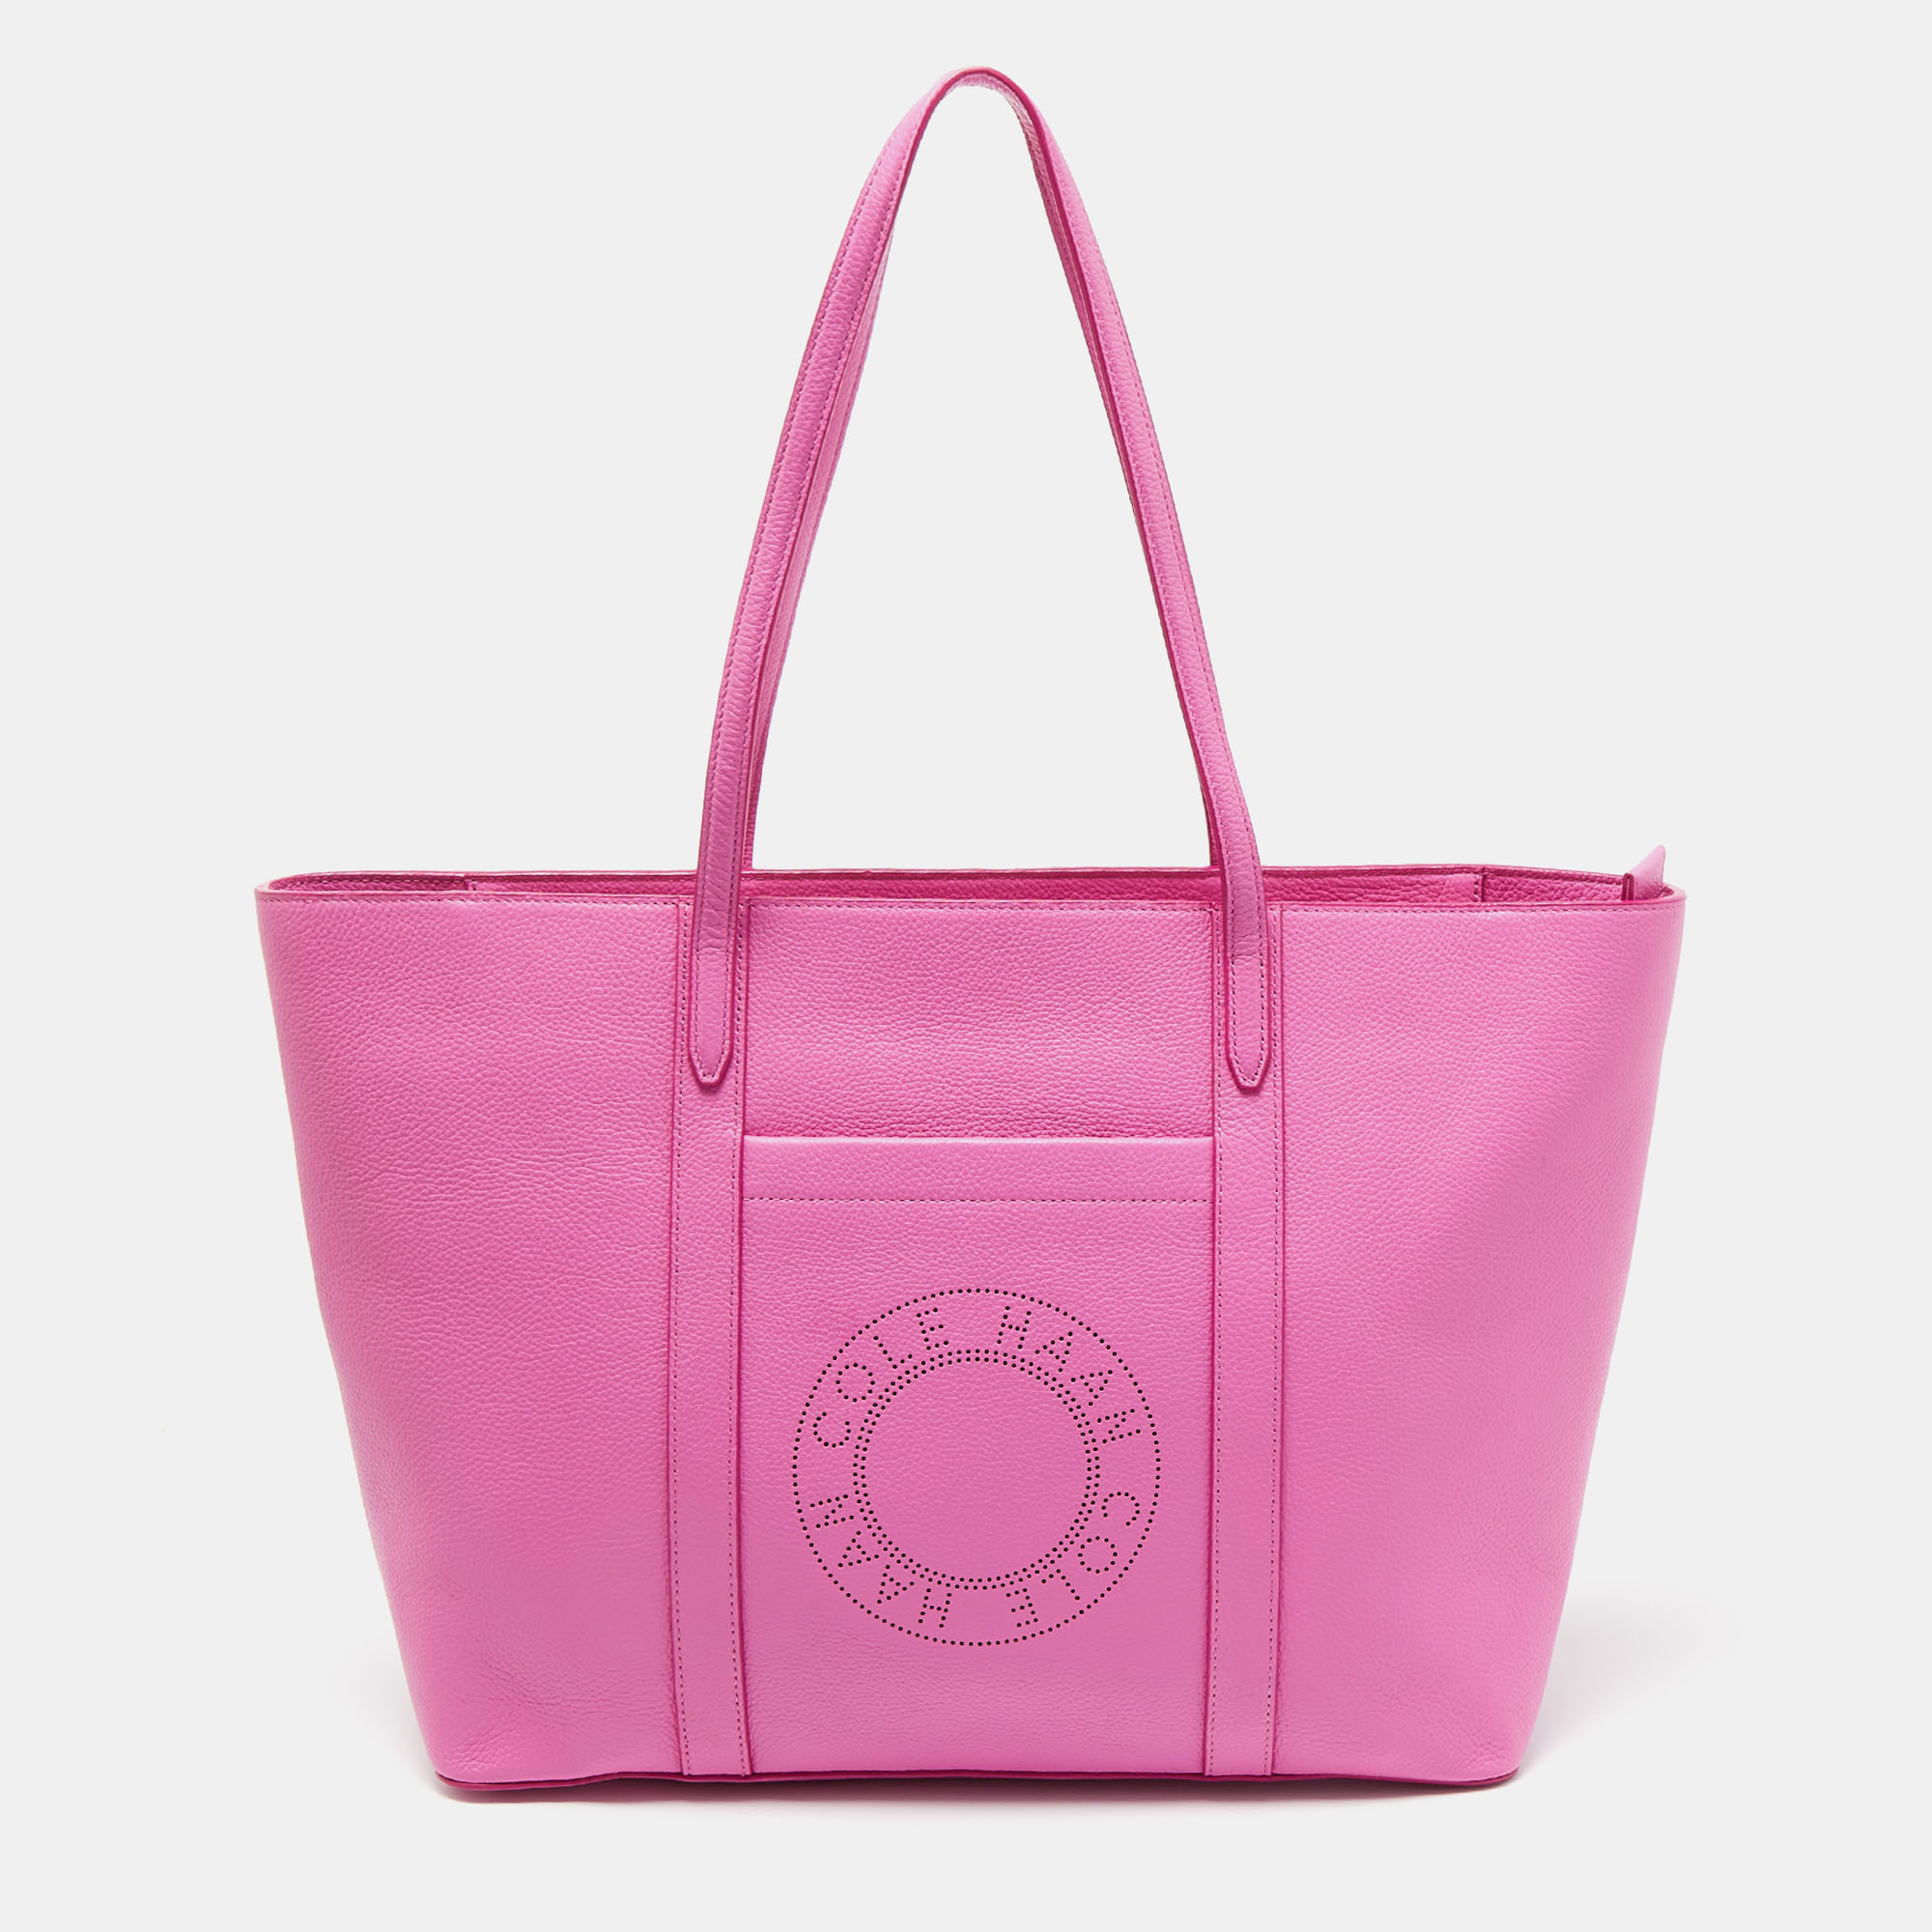 Striking a beautiful balance between essentiality and opulence this tote from the House of Cole Haan ensures that your handbag requirements are taken care of. It is equipped with practical features for all day ease.